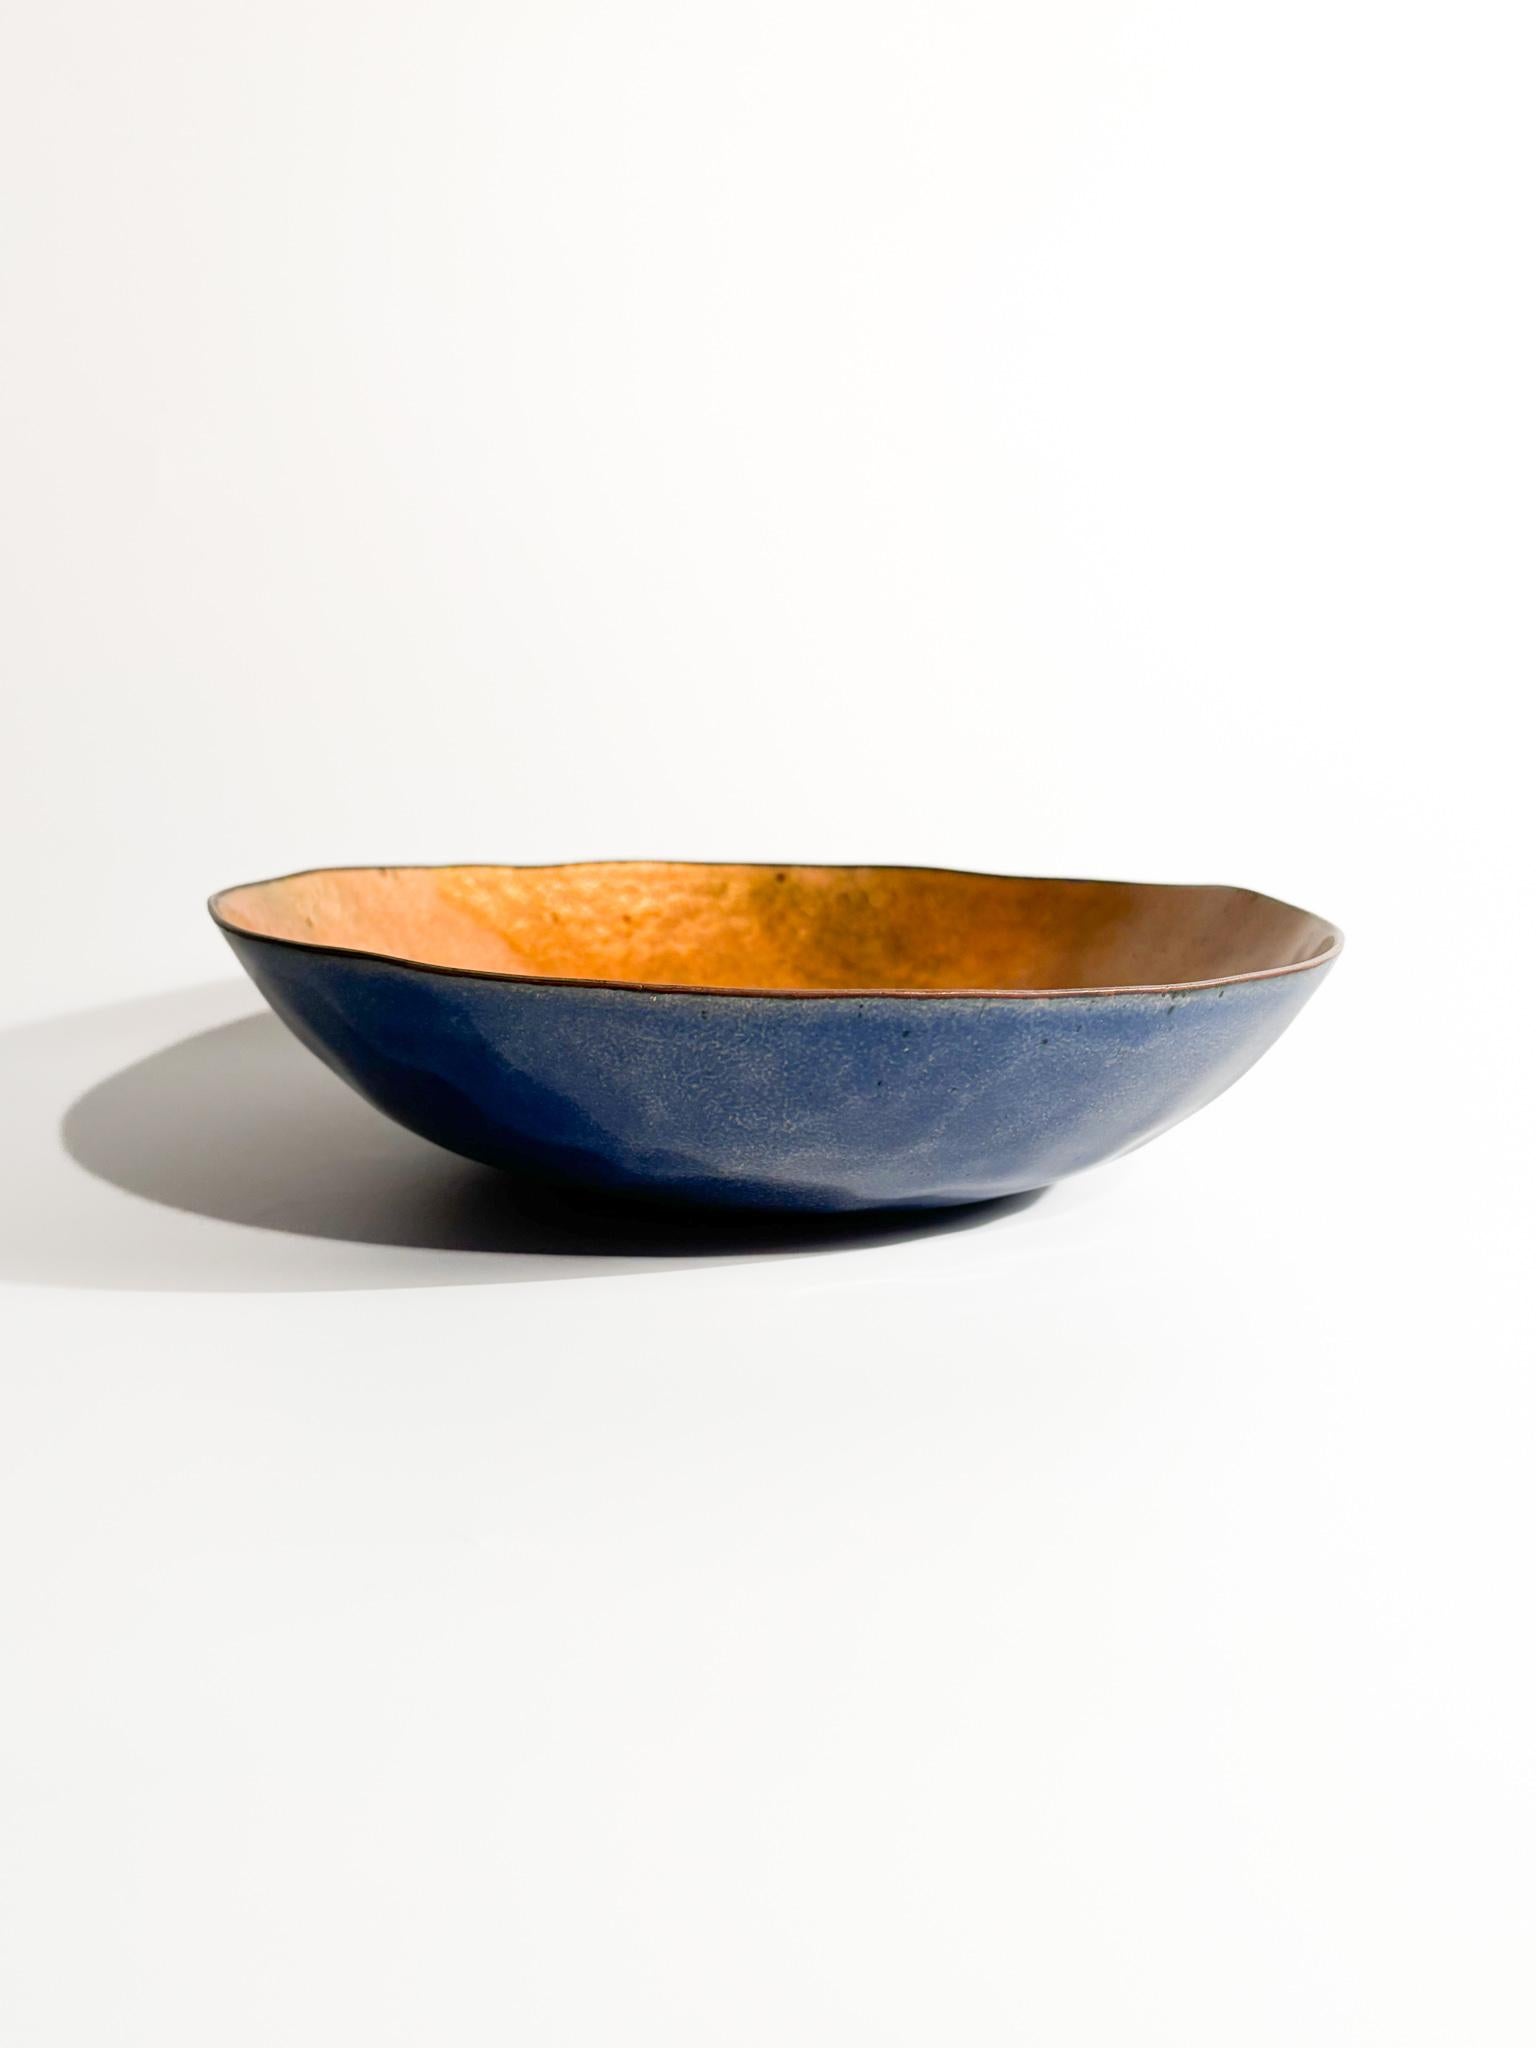 Mid-20th Century Enamelled Copper Bowl by Paolo De Poli from the 1950s For Sale